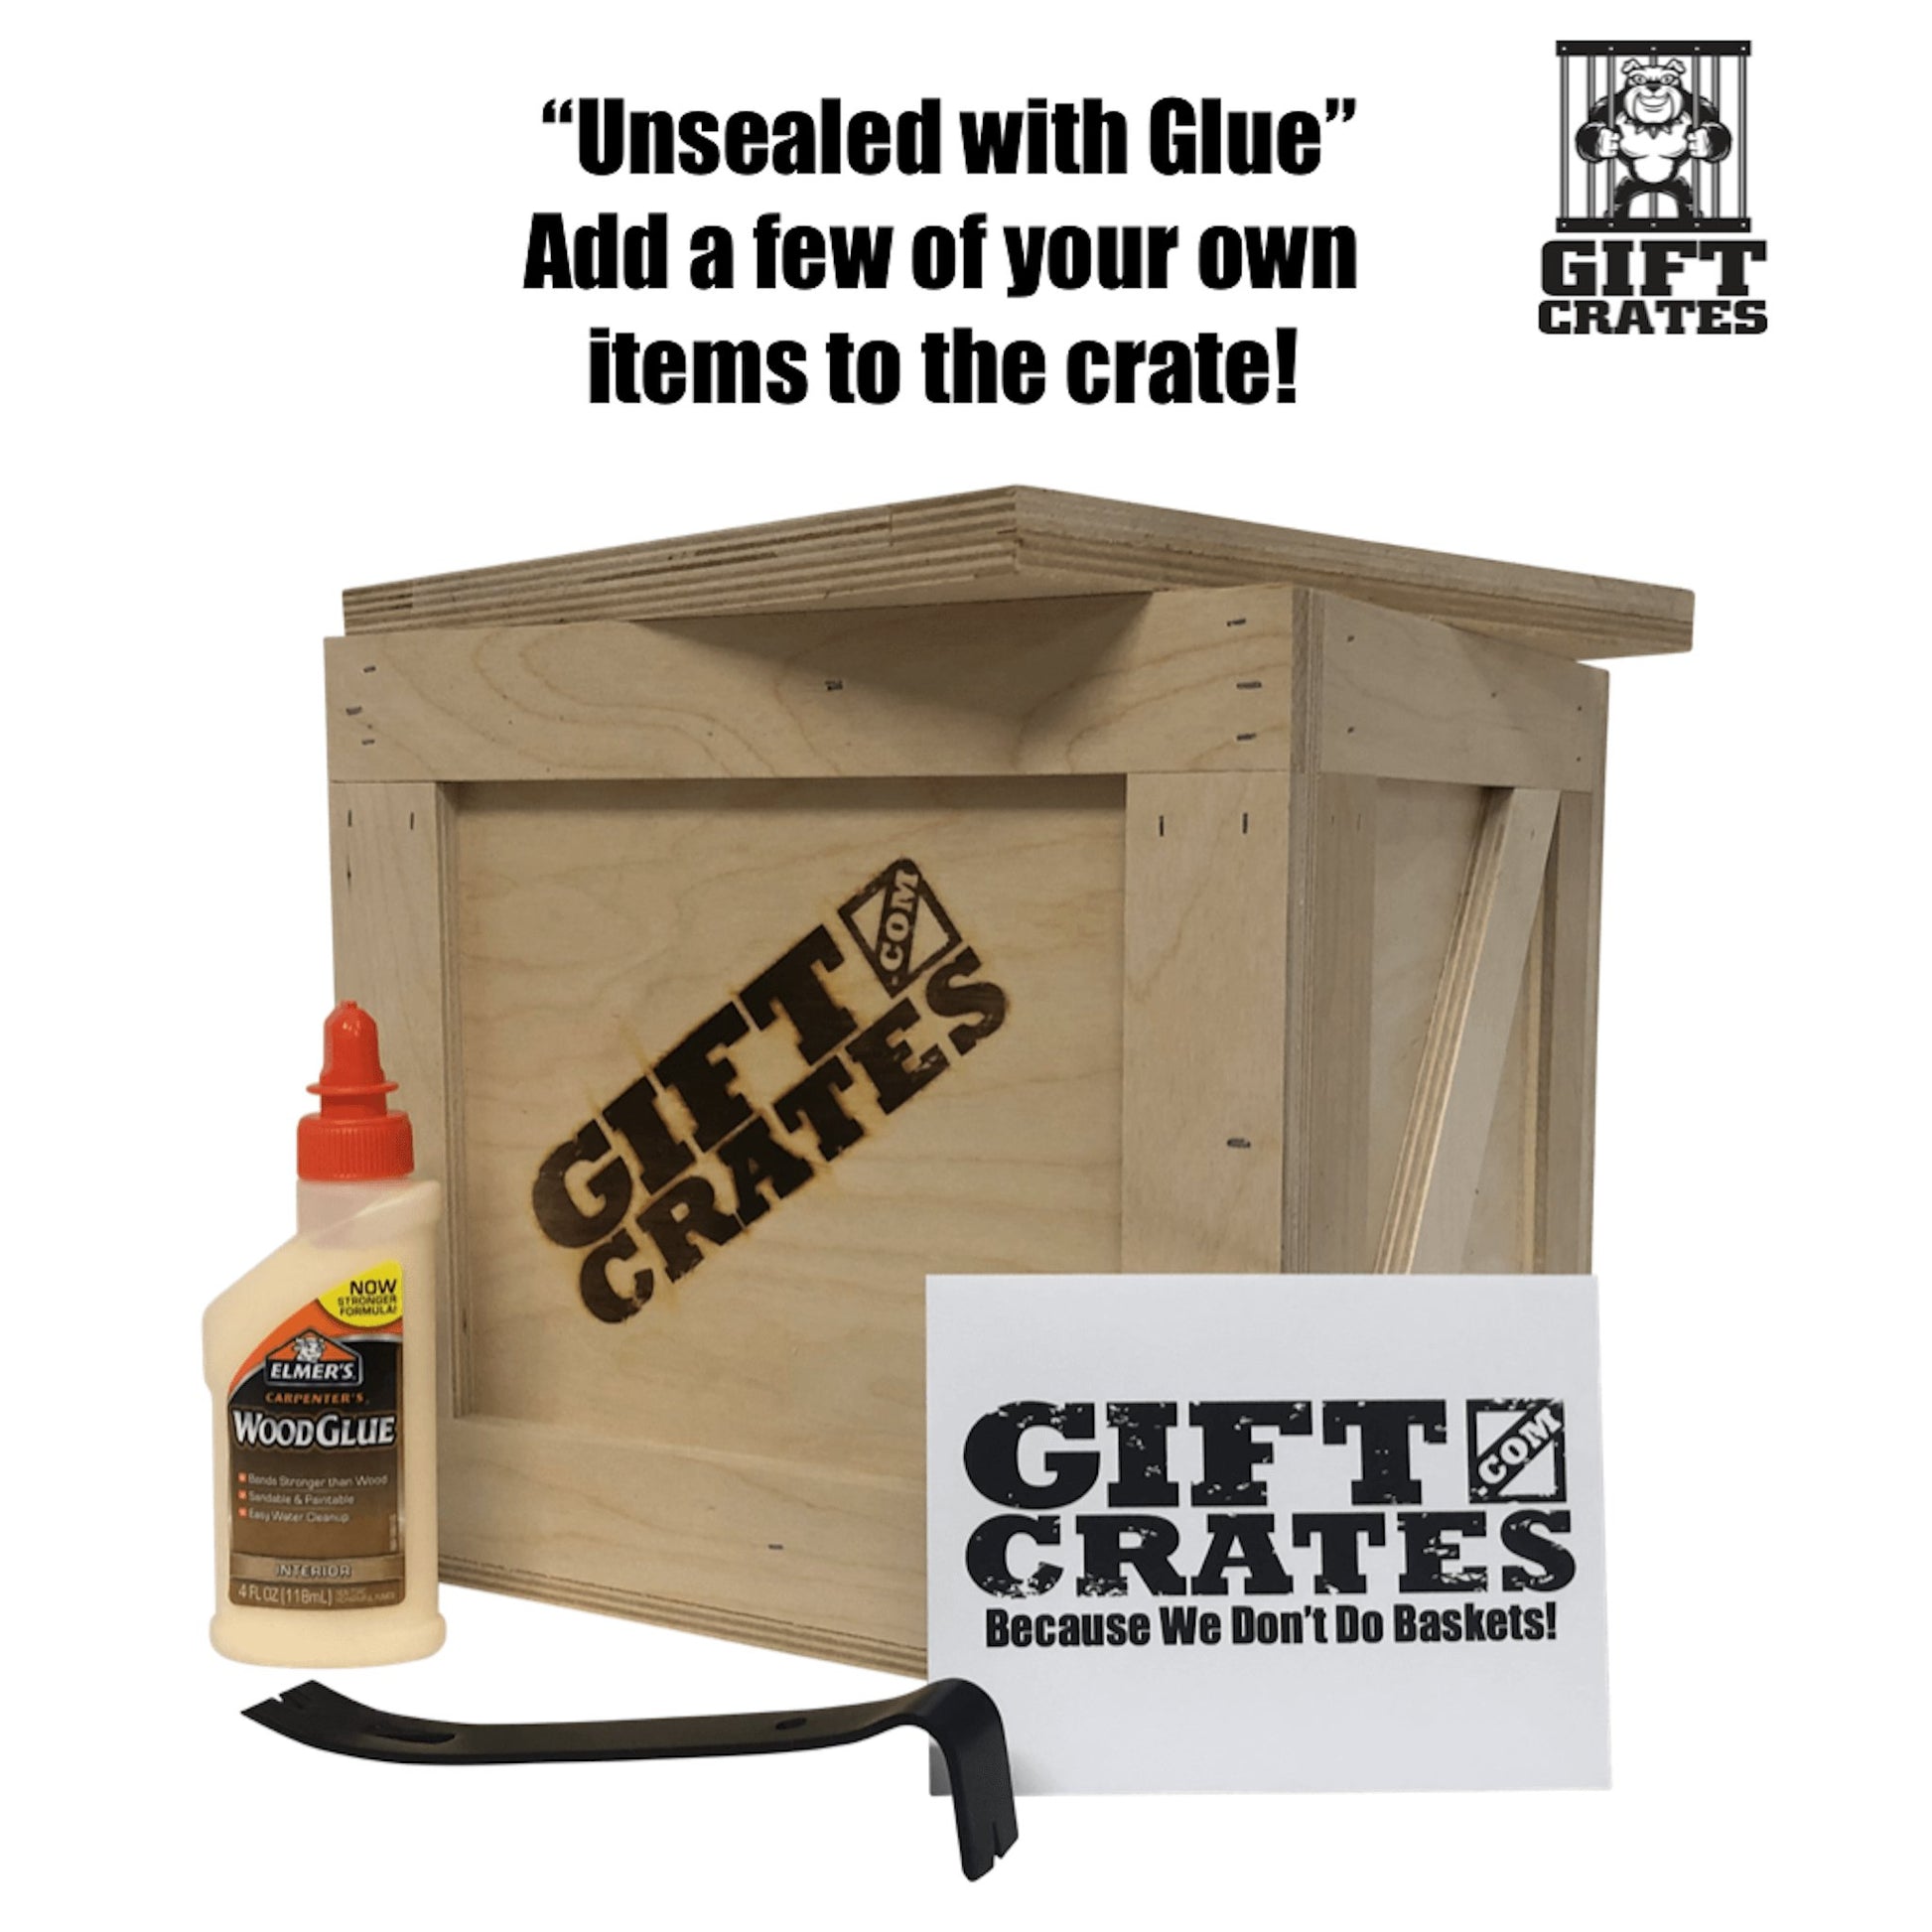 Old School Crate - Gift Crates